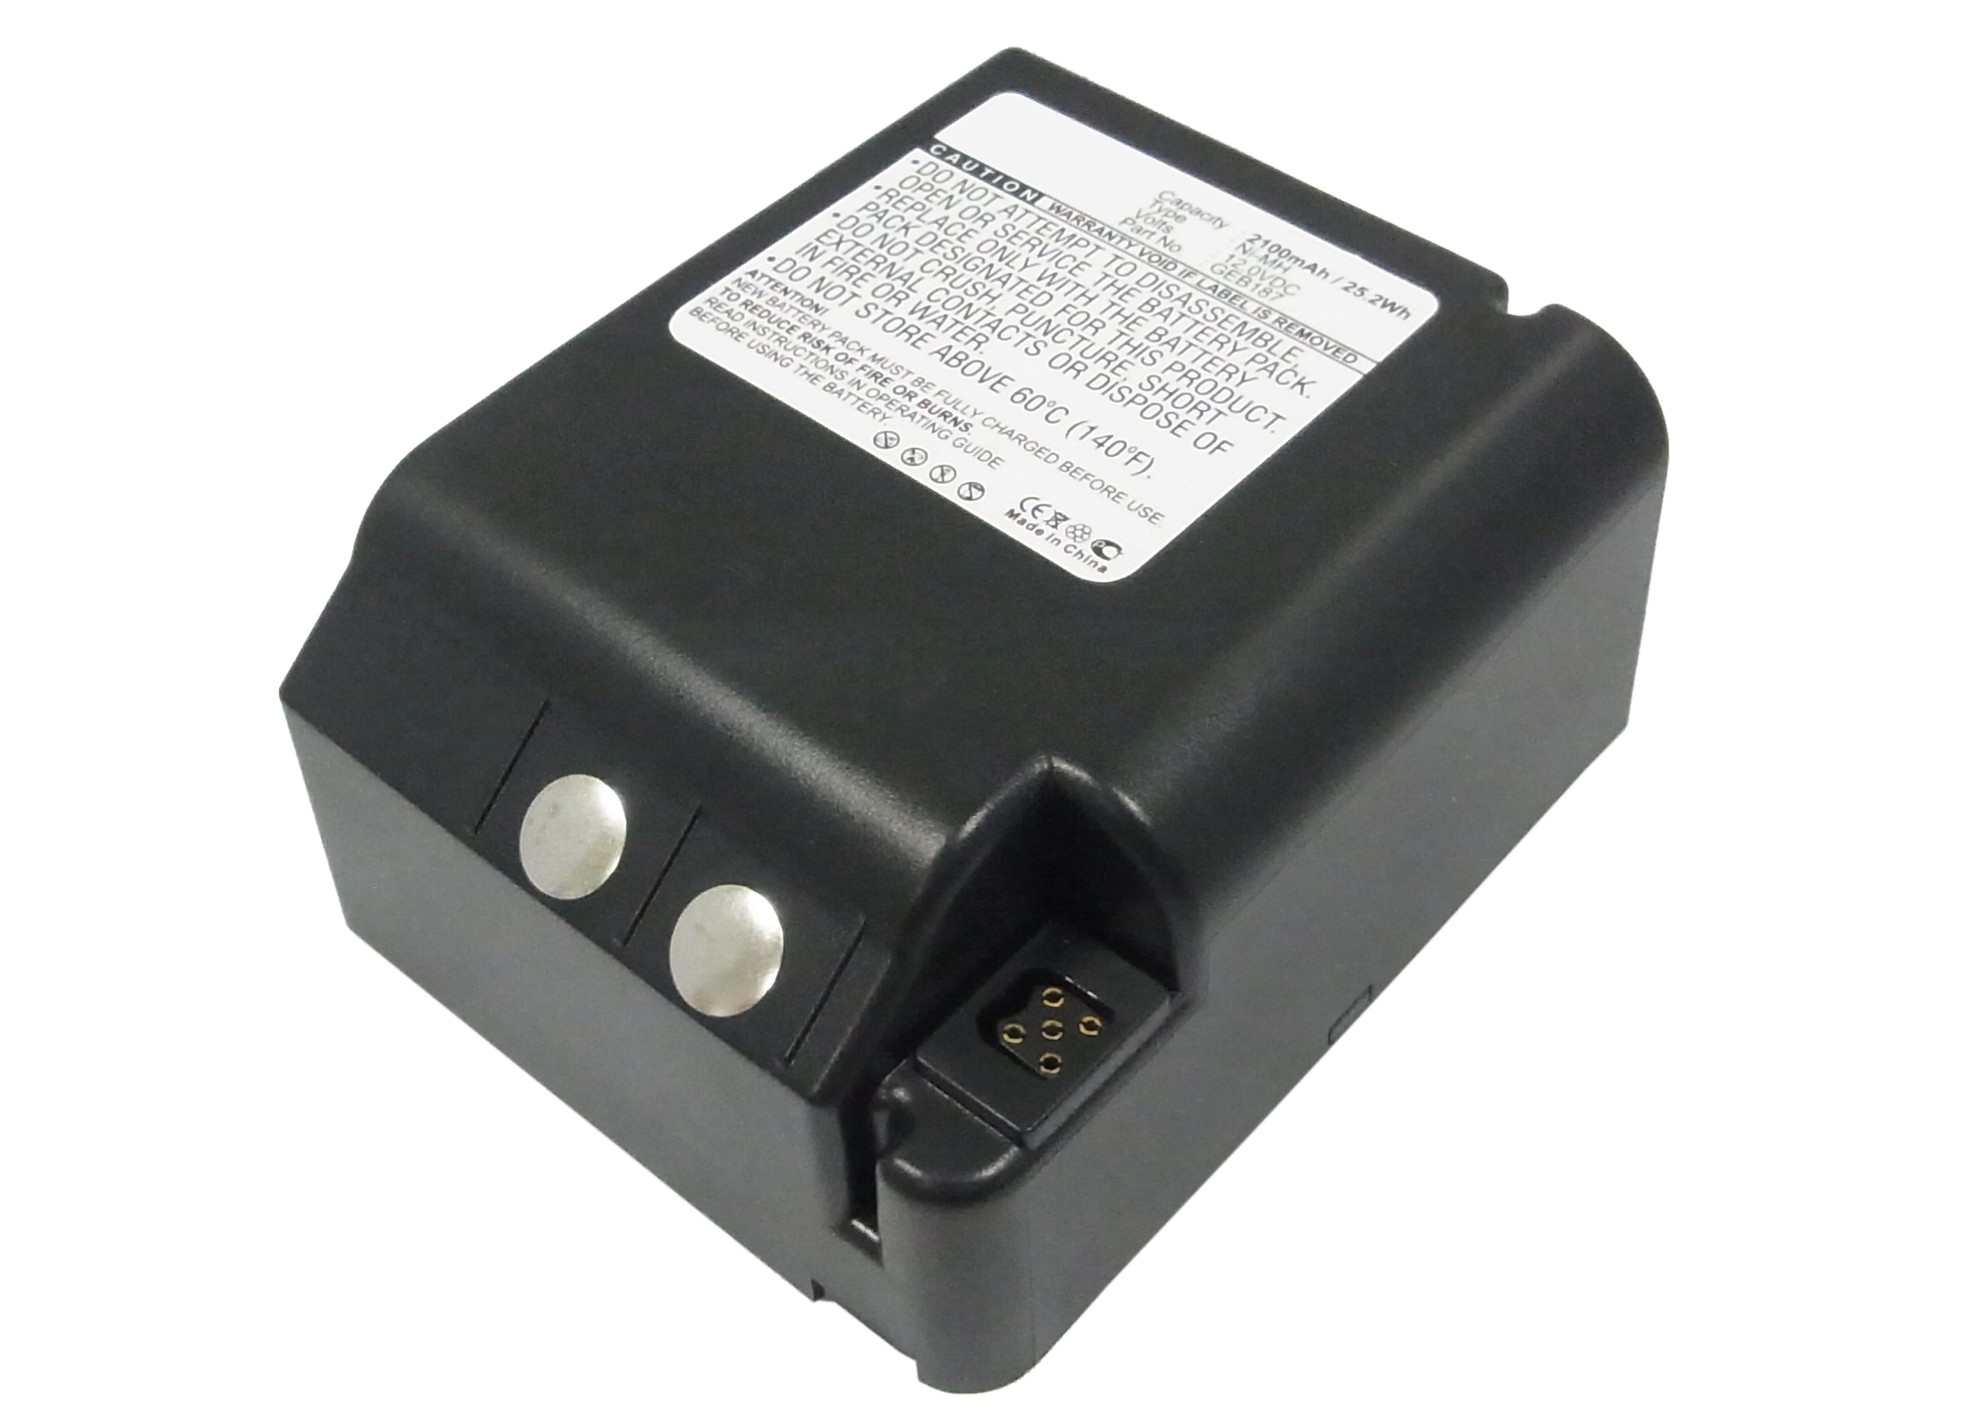 Synergy Digital Equipment Battery, Compatible with Leica GEB187, GEB87 Equipment Battery (12V, Ni-MH, 2100mAh)